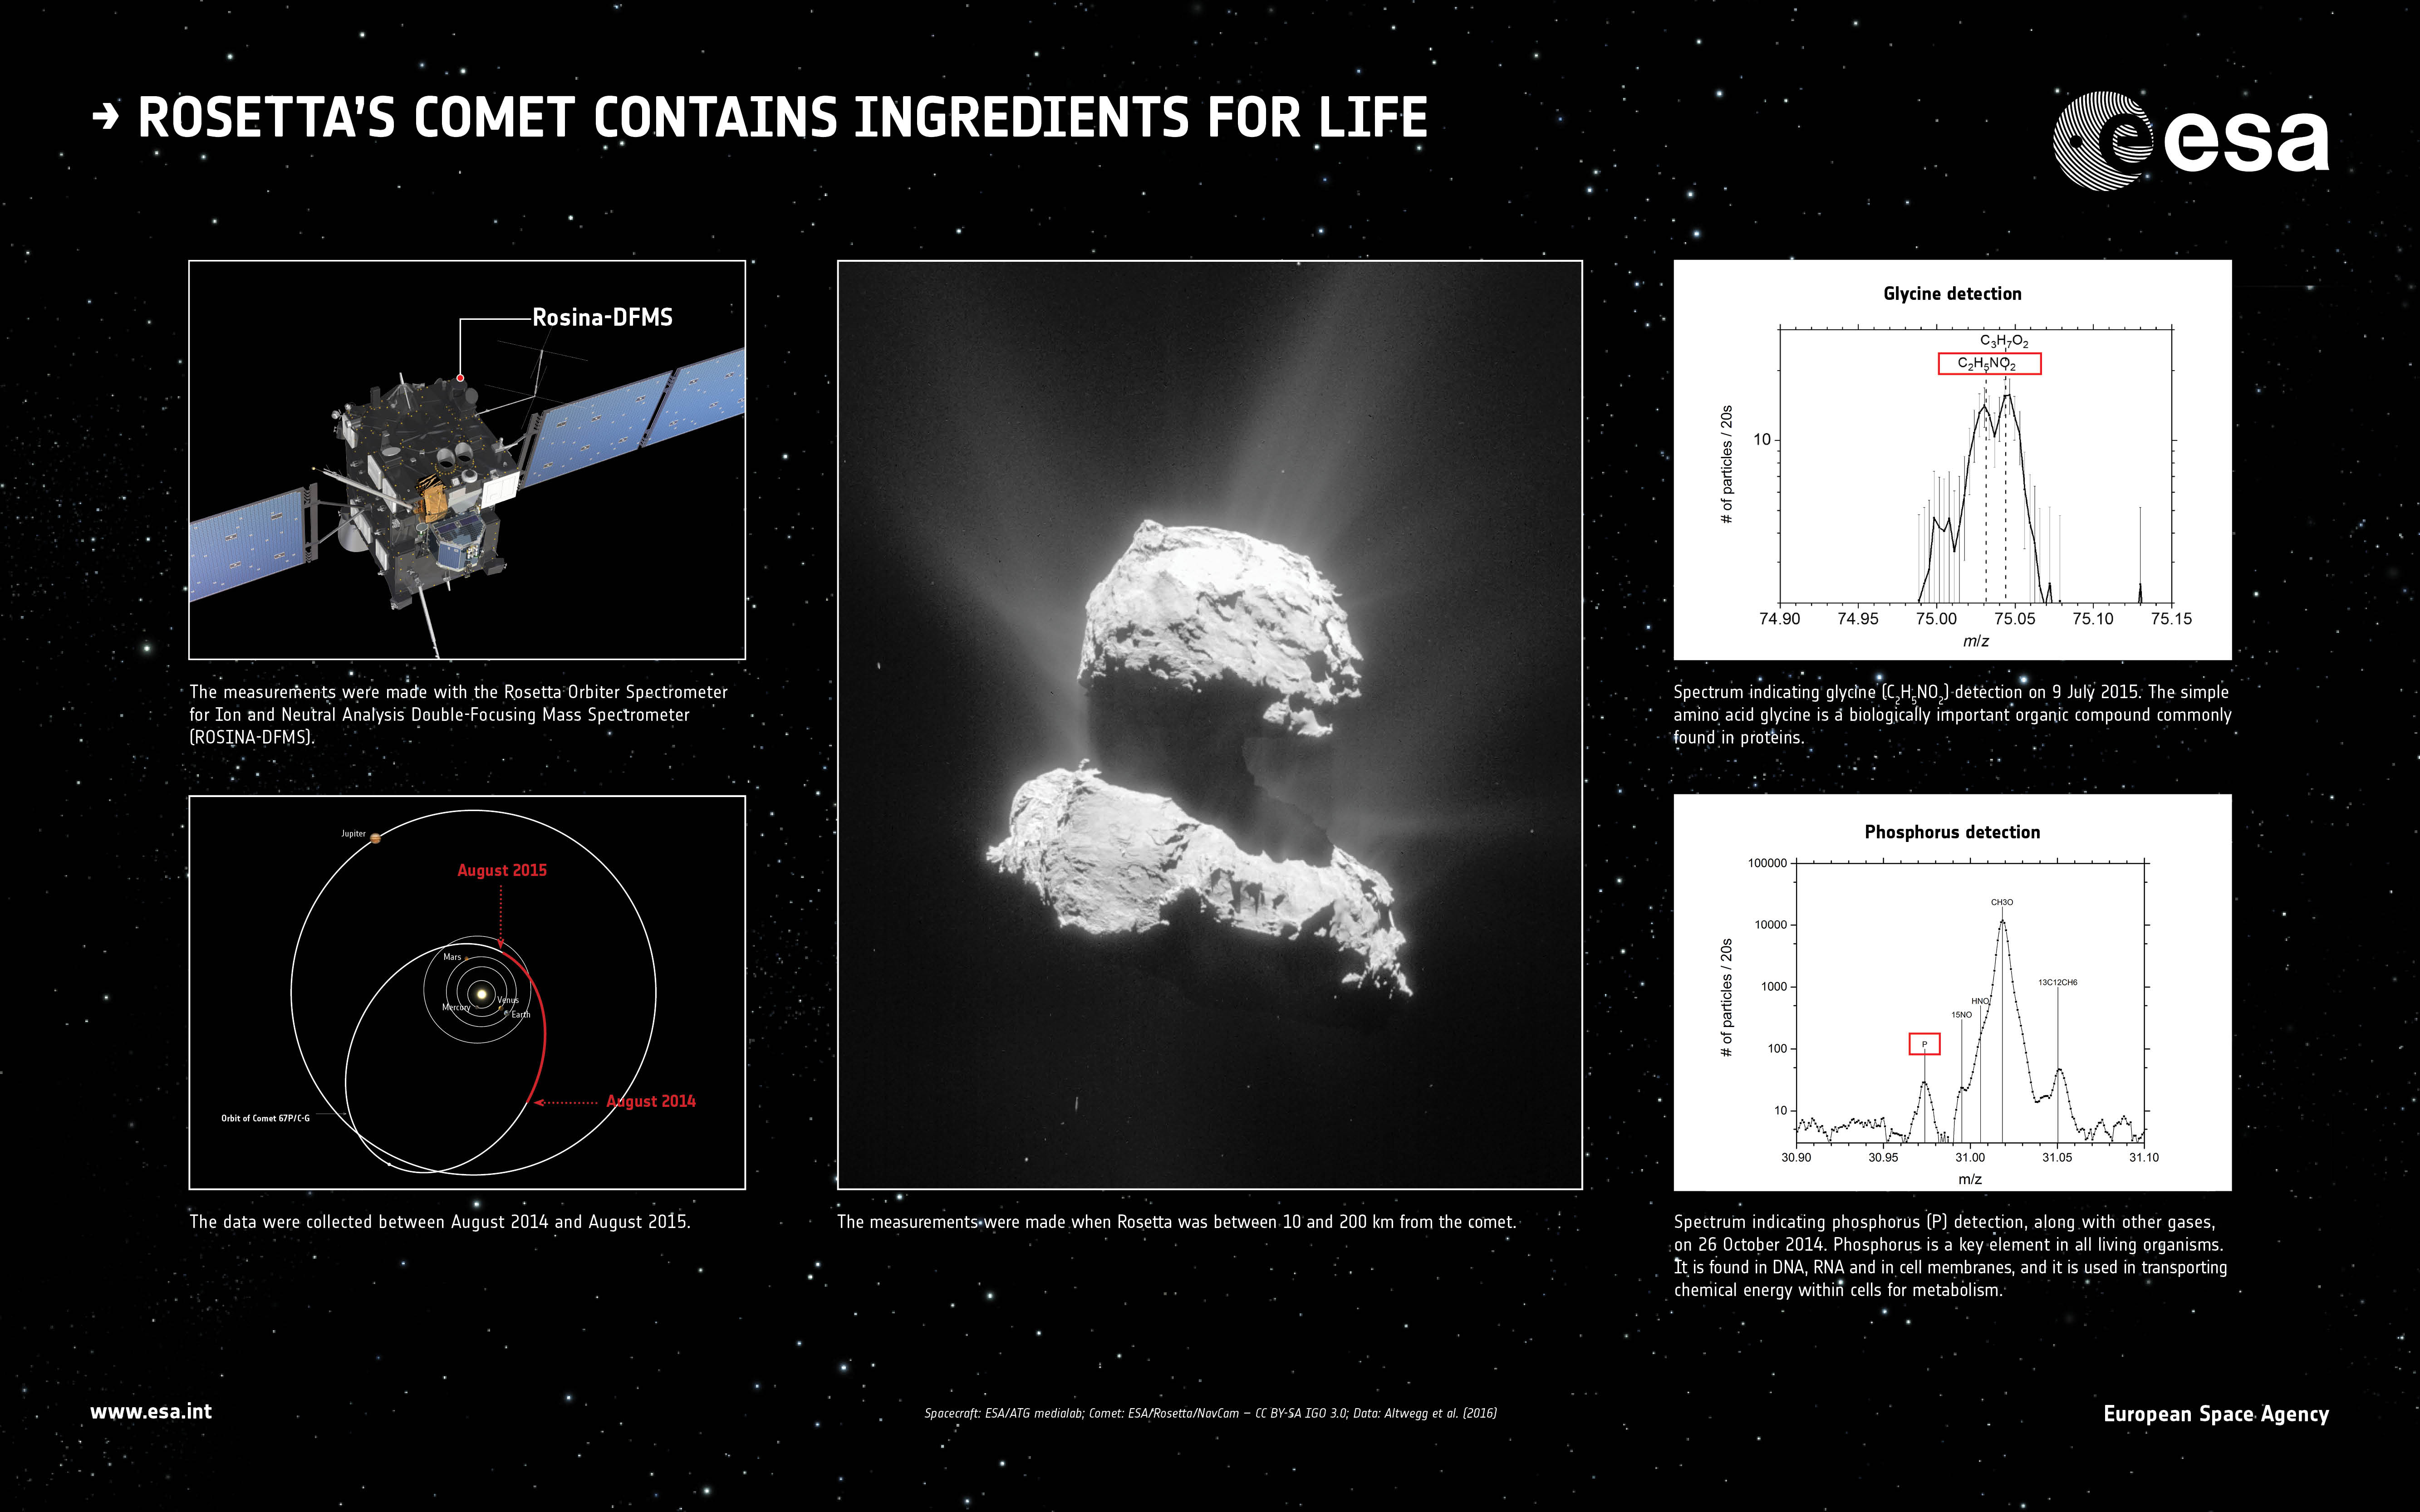 Rosetta_s_comet_contains_ingredients_for_life